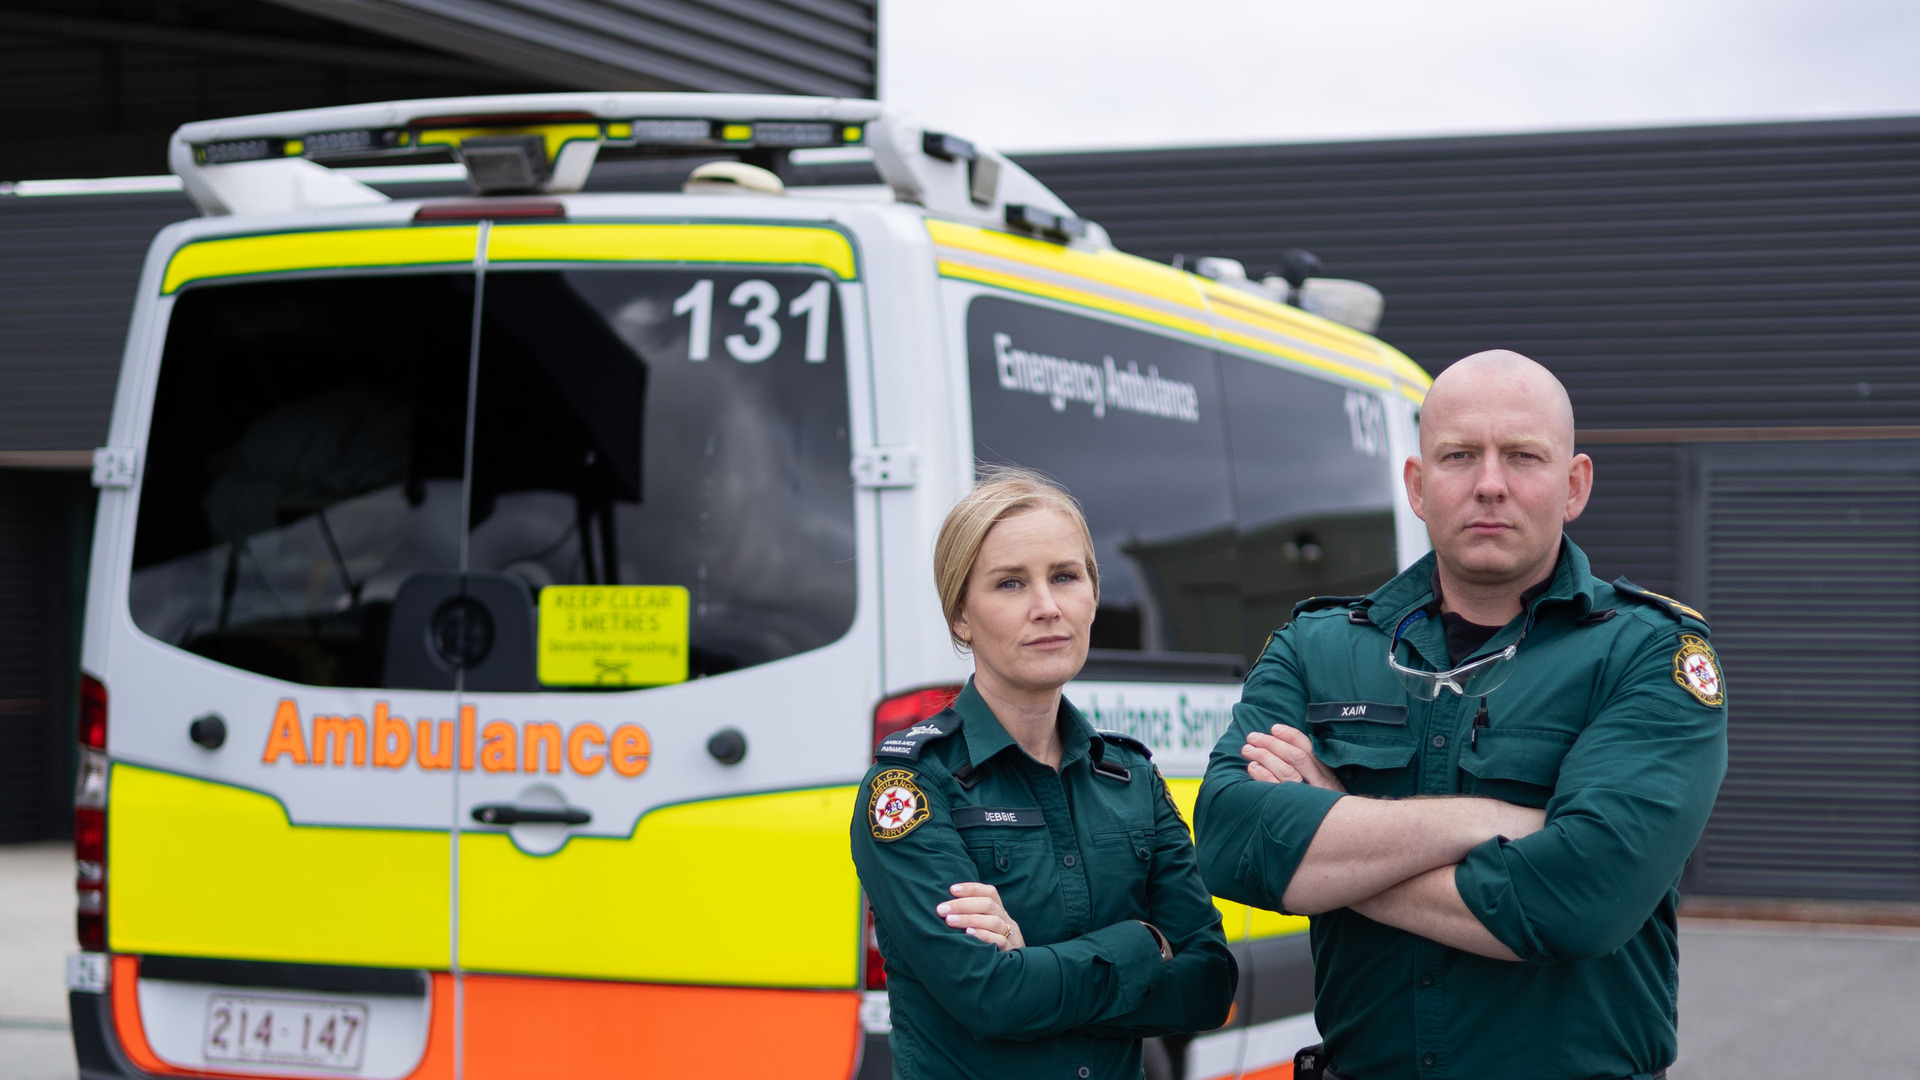 A male and female ambulance worker stand in front of an ambulance.